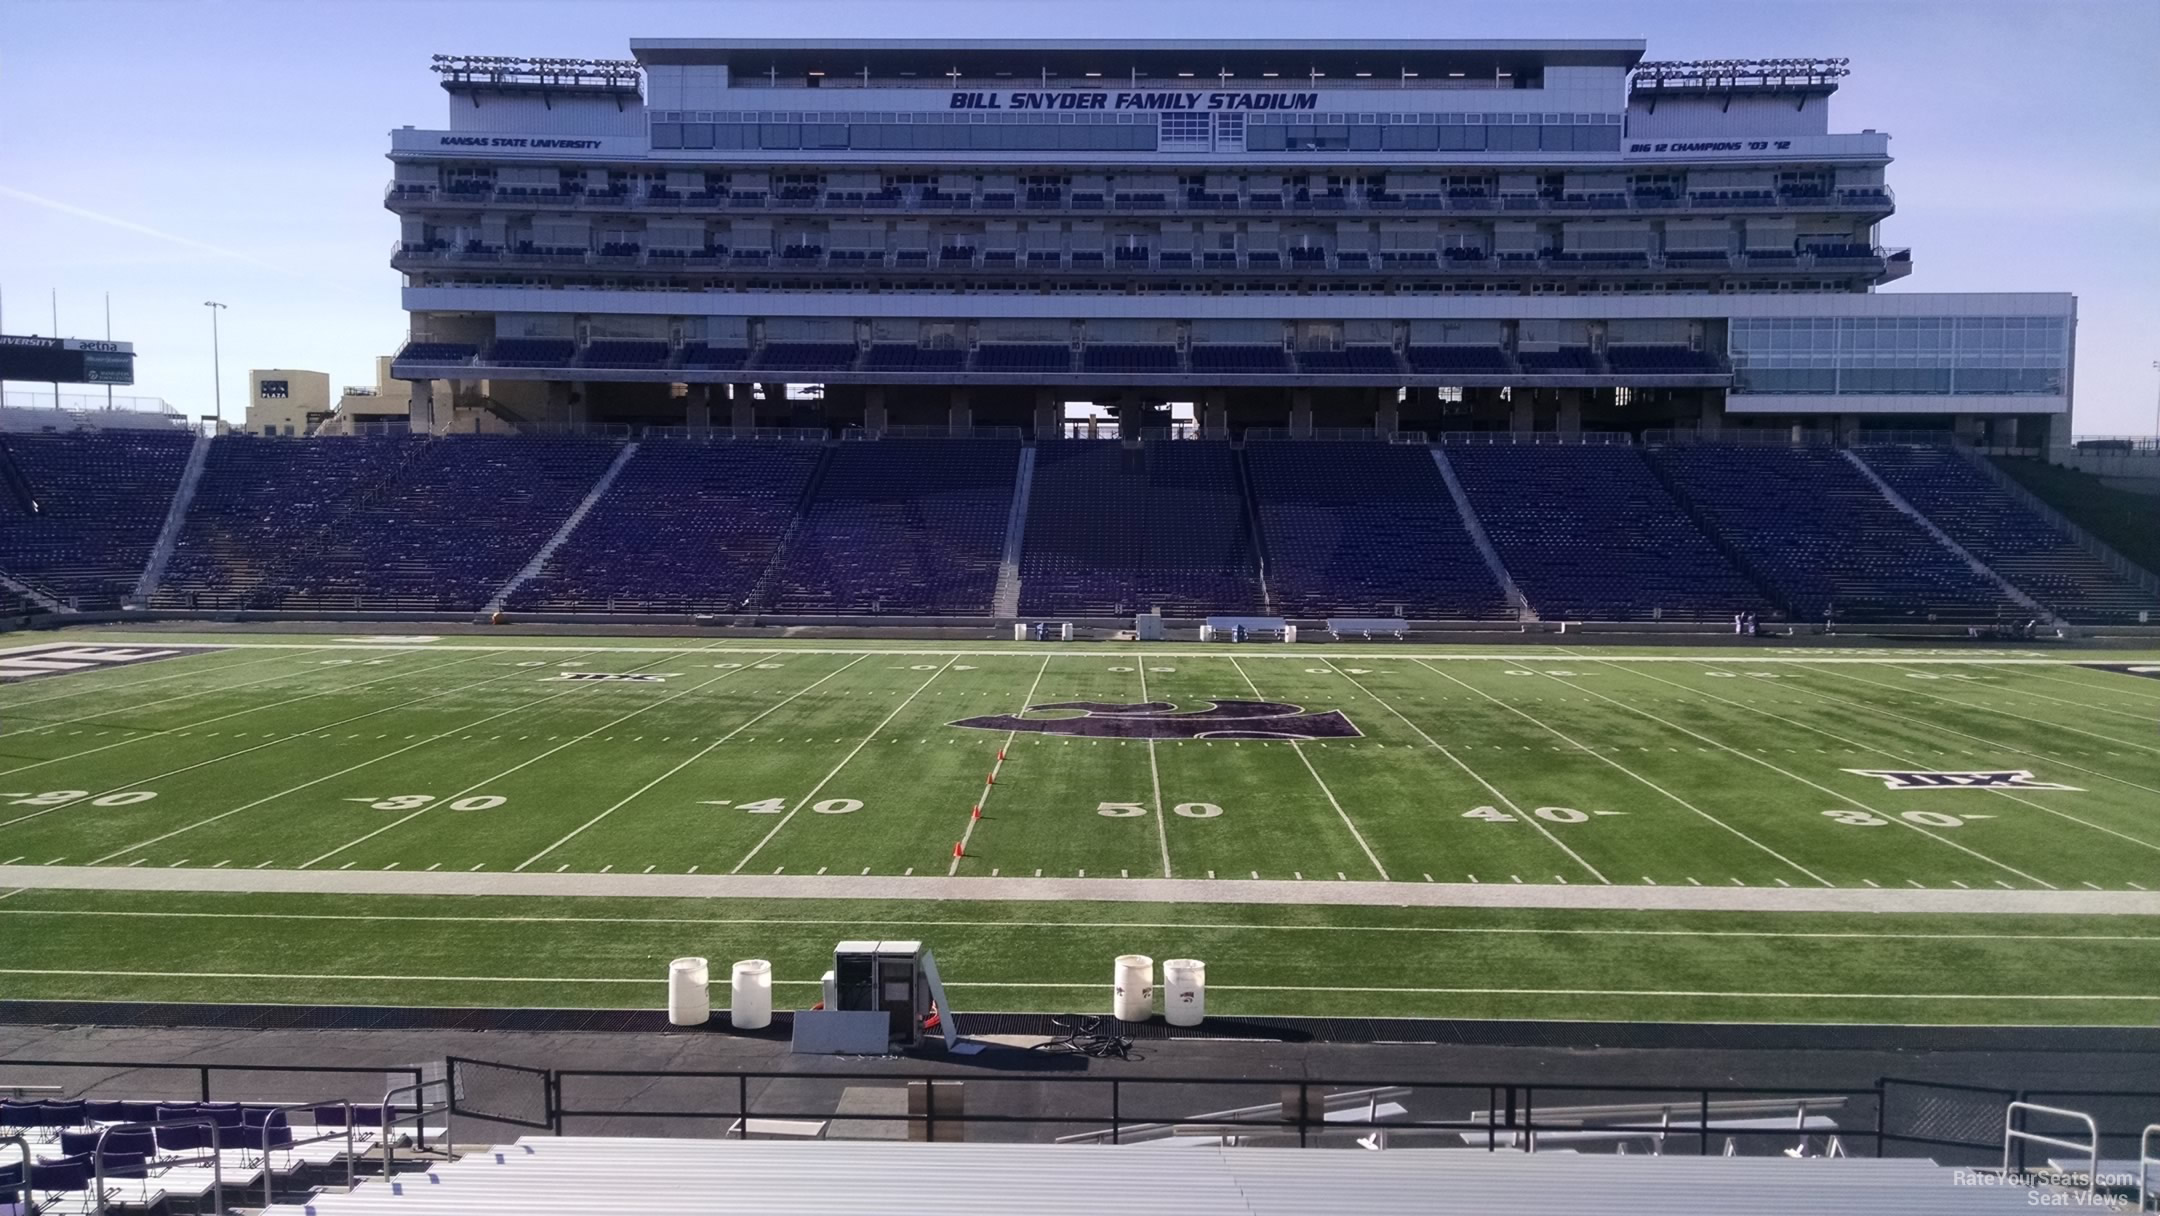 section 24, row 25 seat view  - bill snyder family stadium